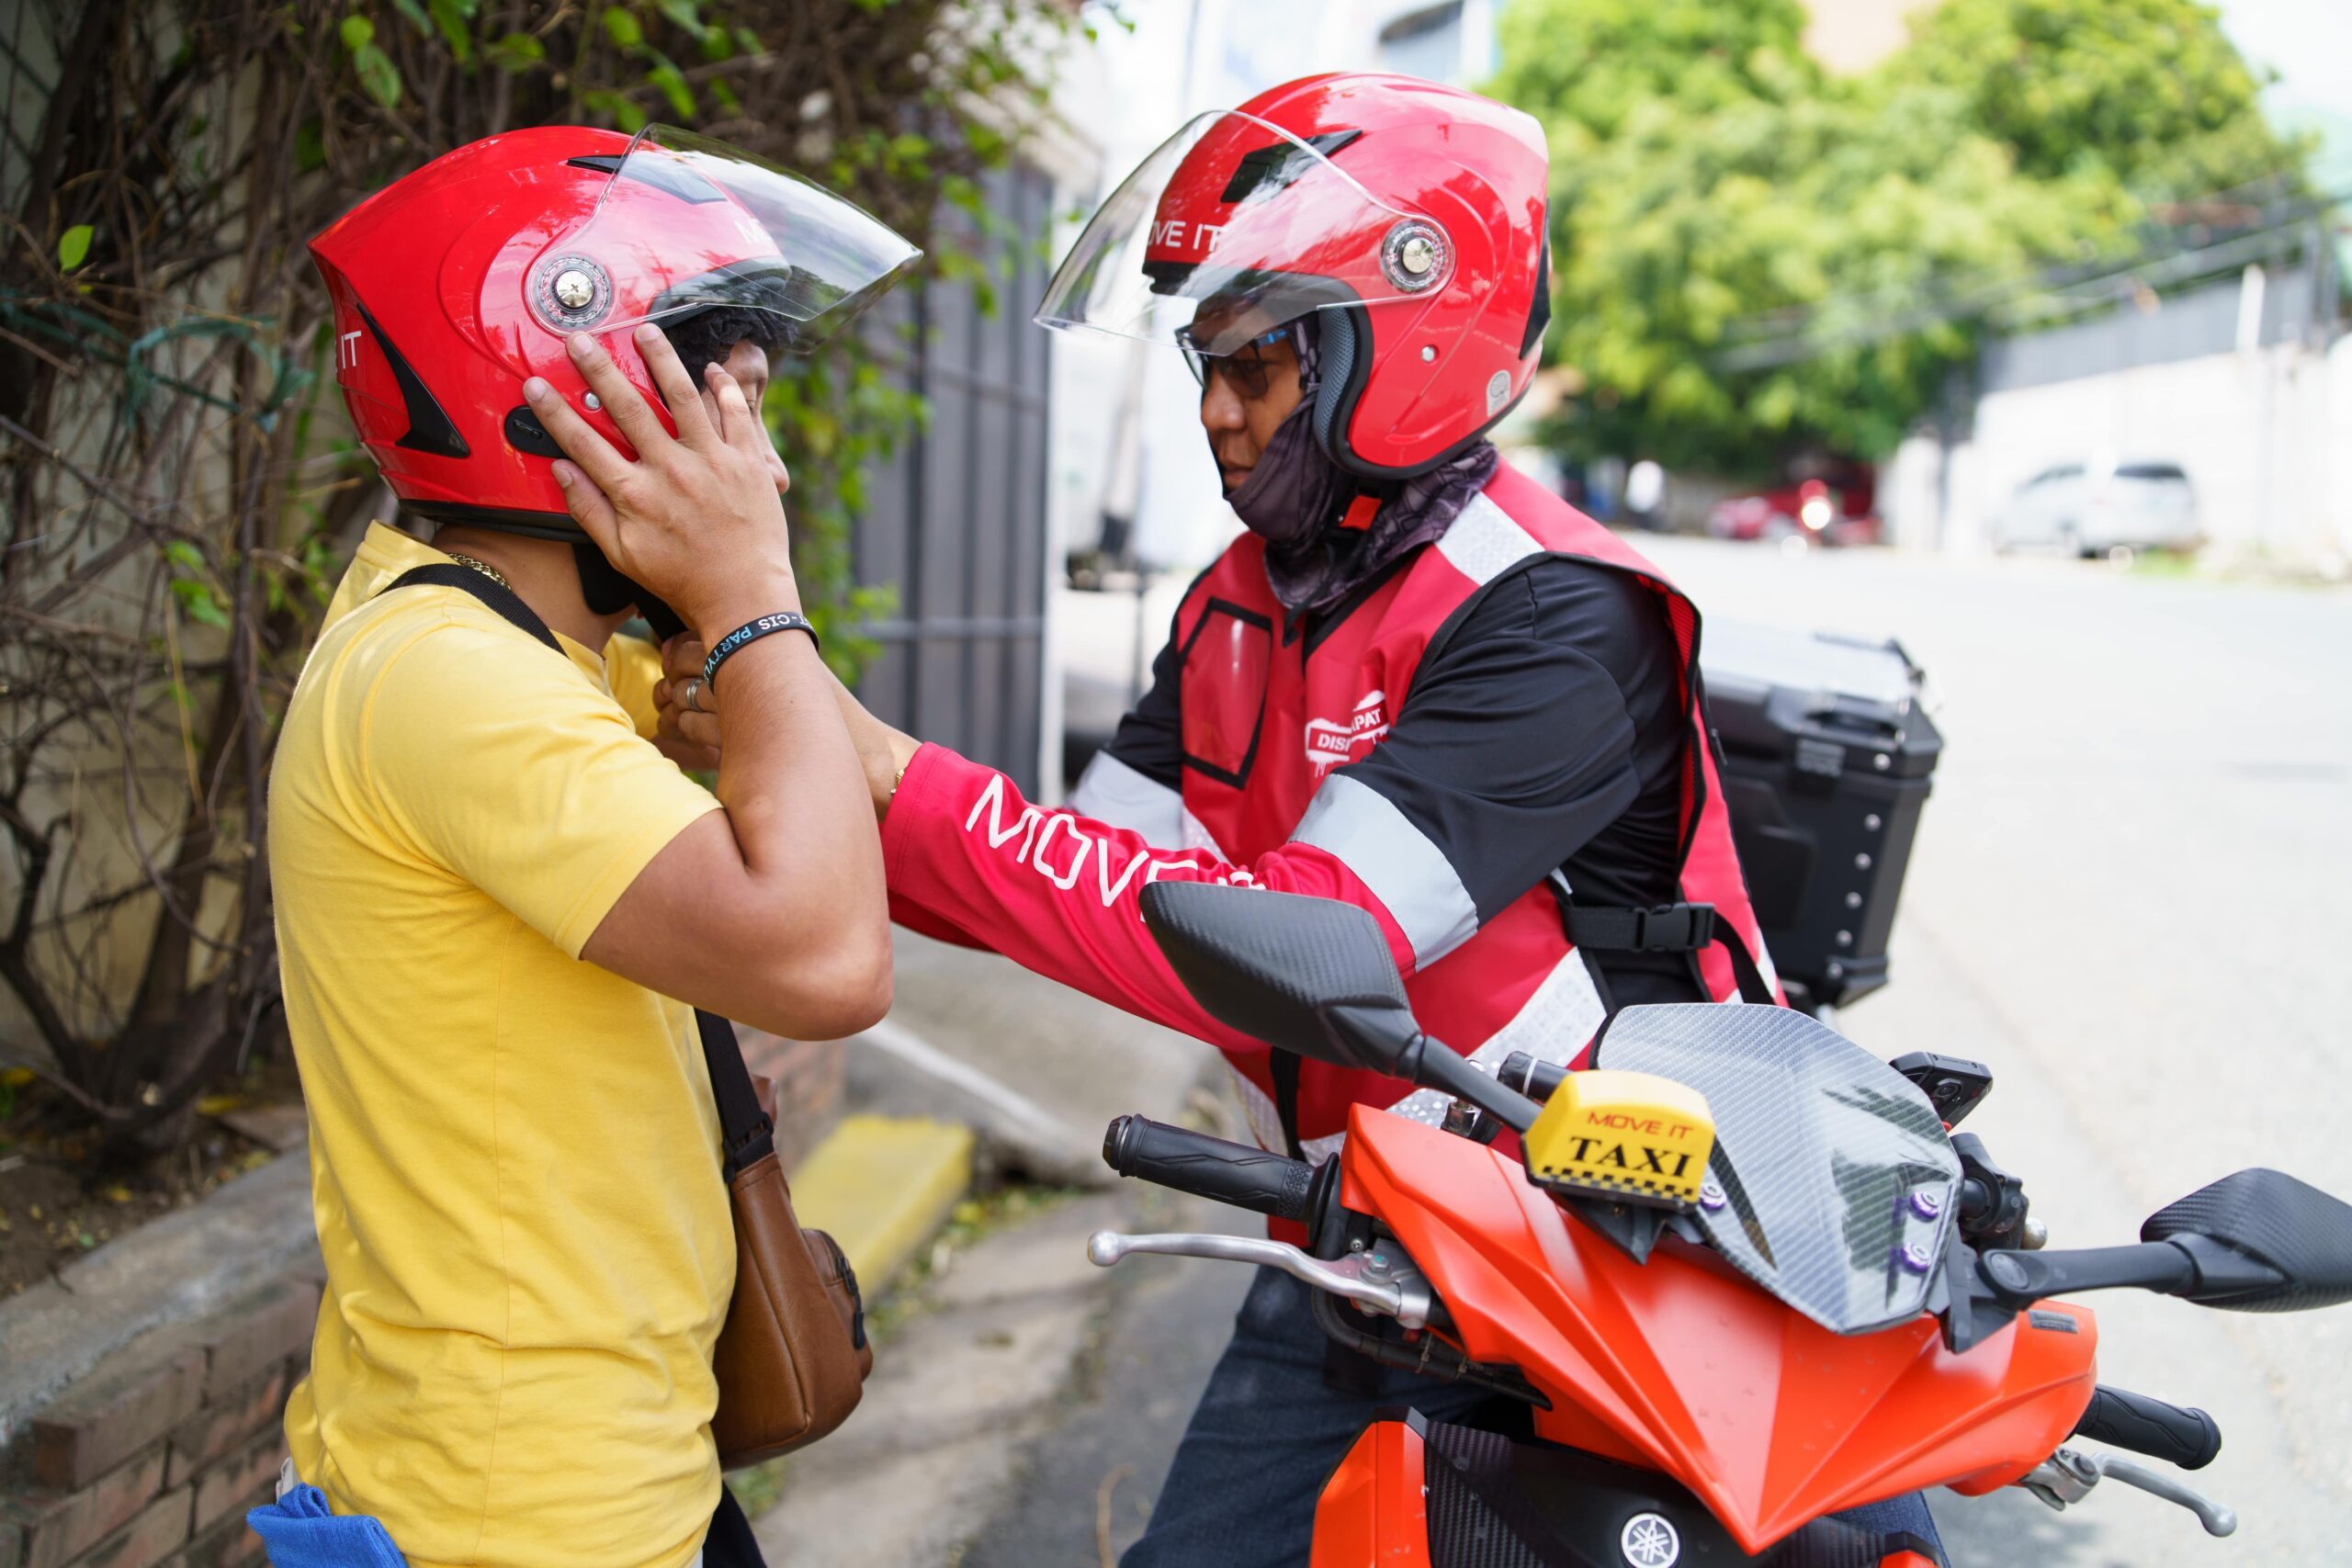 Hailing a motorcycle ride? Remember these #DiskartengTapat commuter tips